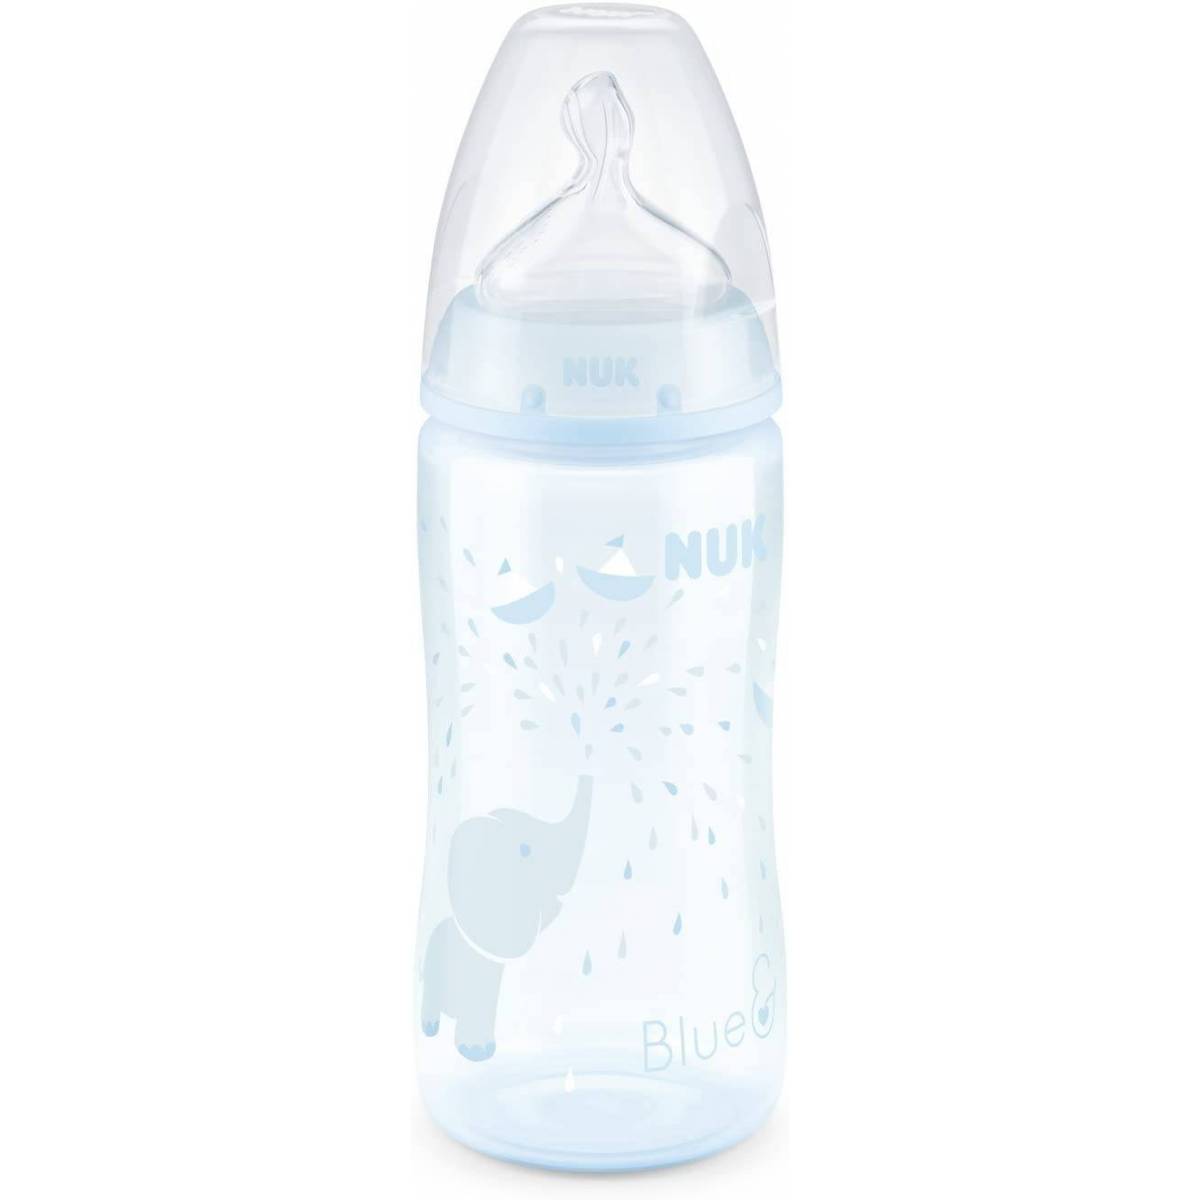 Baby bottle Nuk 300 ml First choice+ 0-6 months Elephant